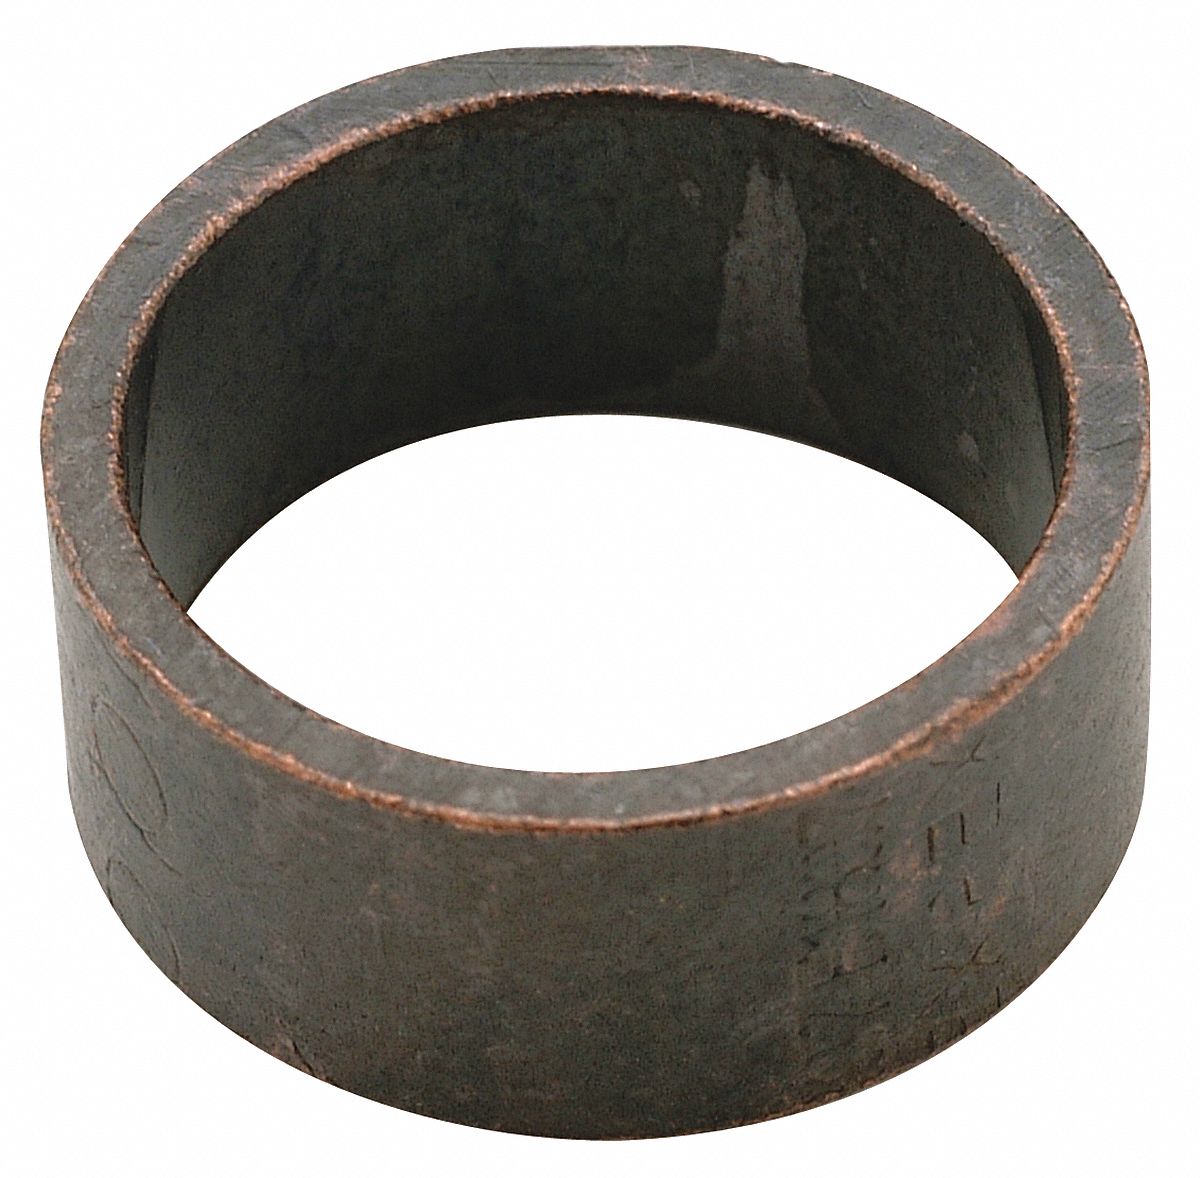 Copper Crimp Clamp Ring, Clamp Connection Type, 1/2